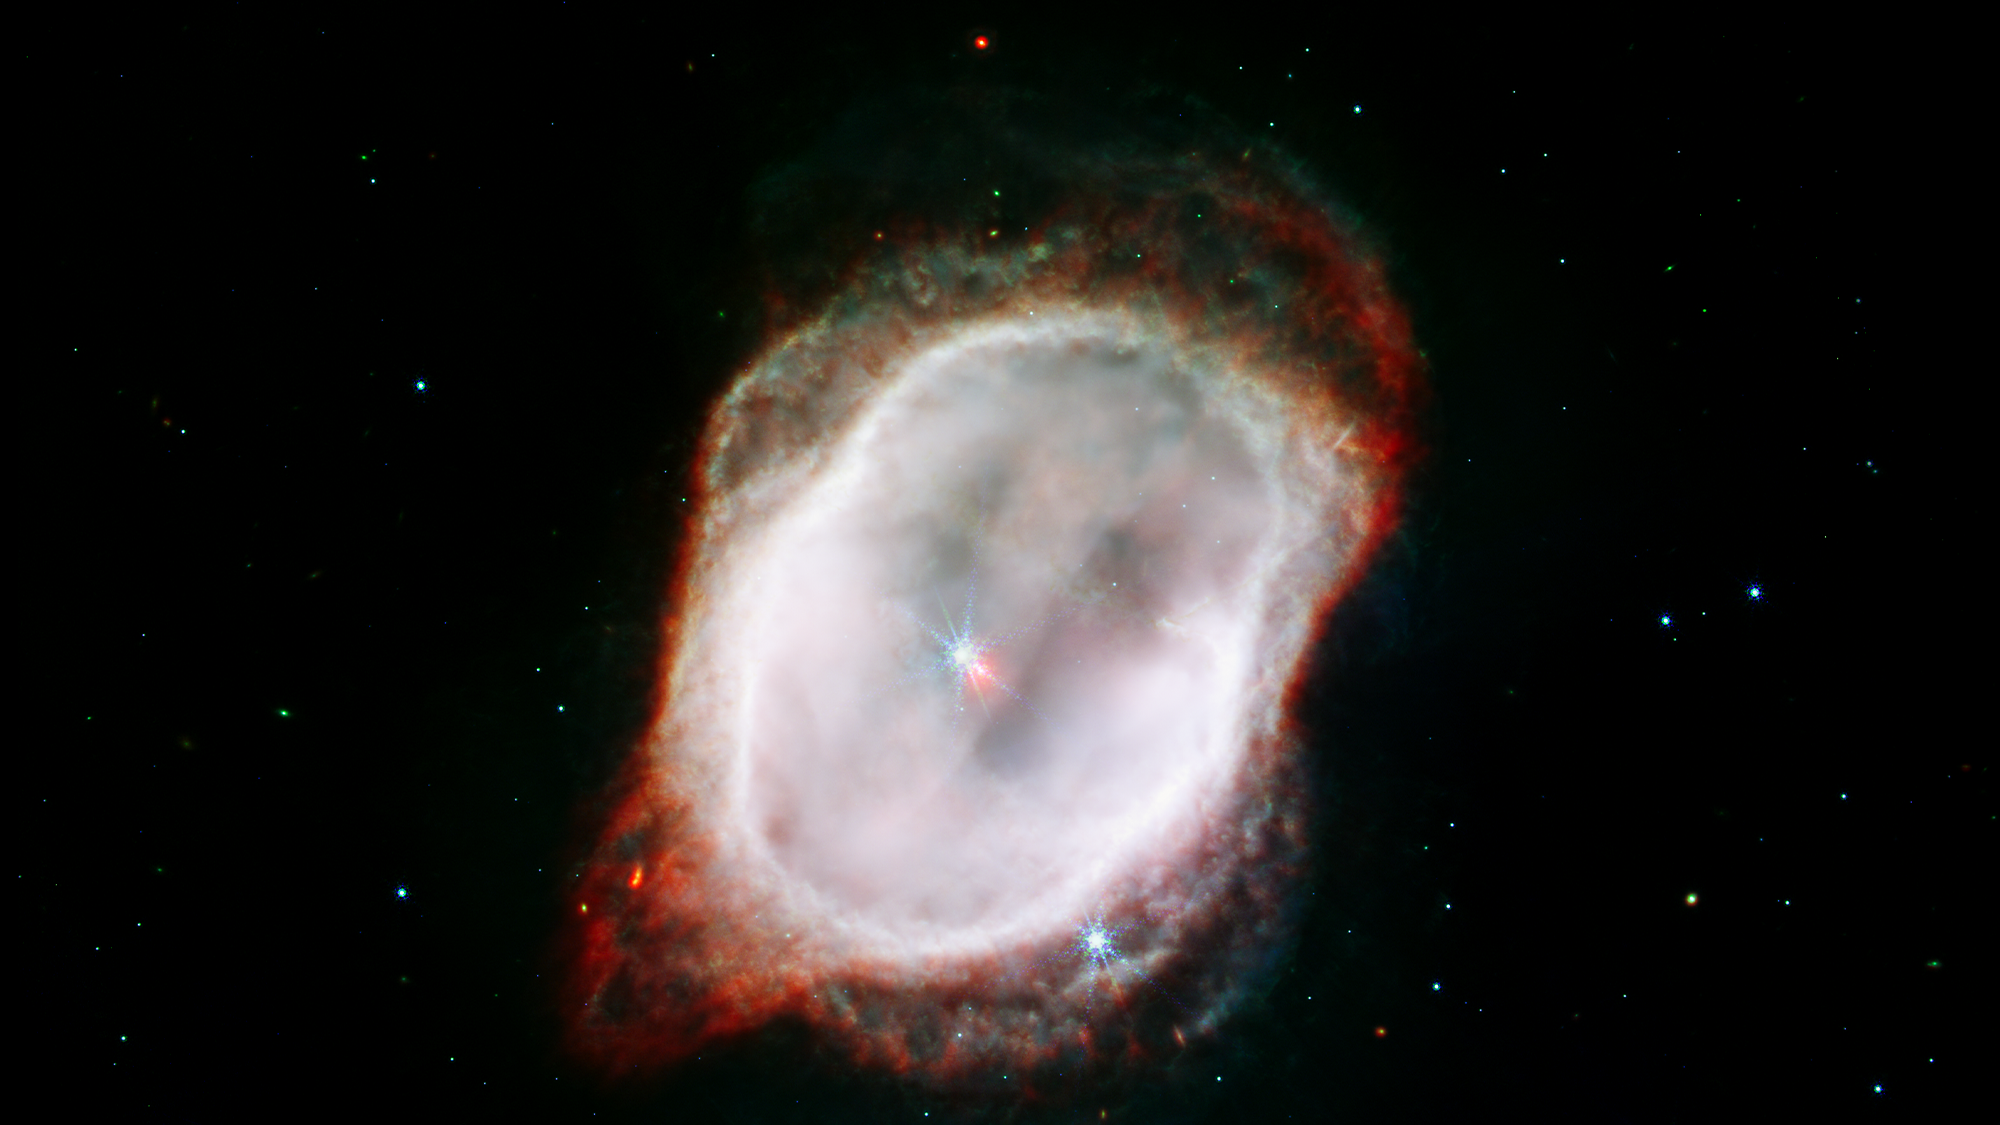 An image of the Southern Ring Nebula (NGC 3132), captured by Webb’s Near-Infrared Camera (NIRCam) and Mid-Infrared Instrument (MIRI).